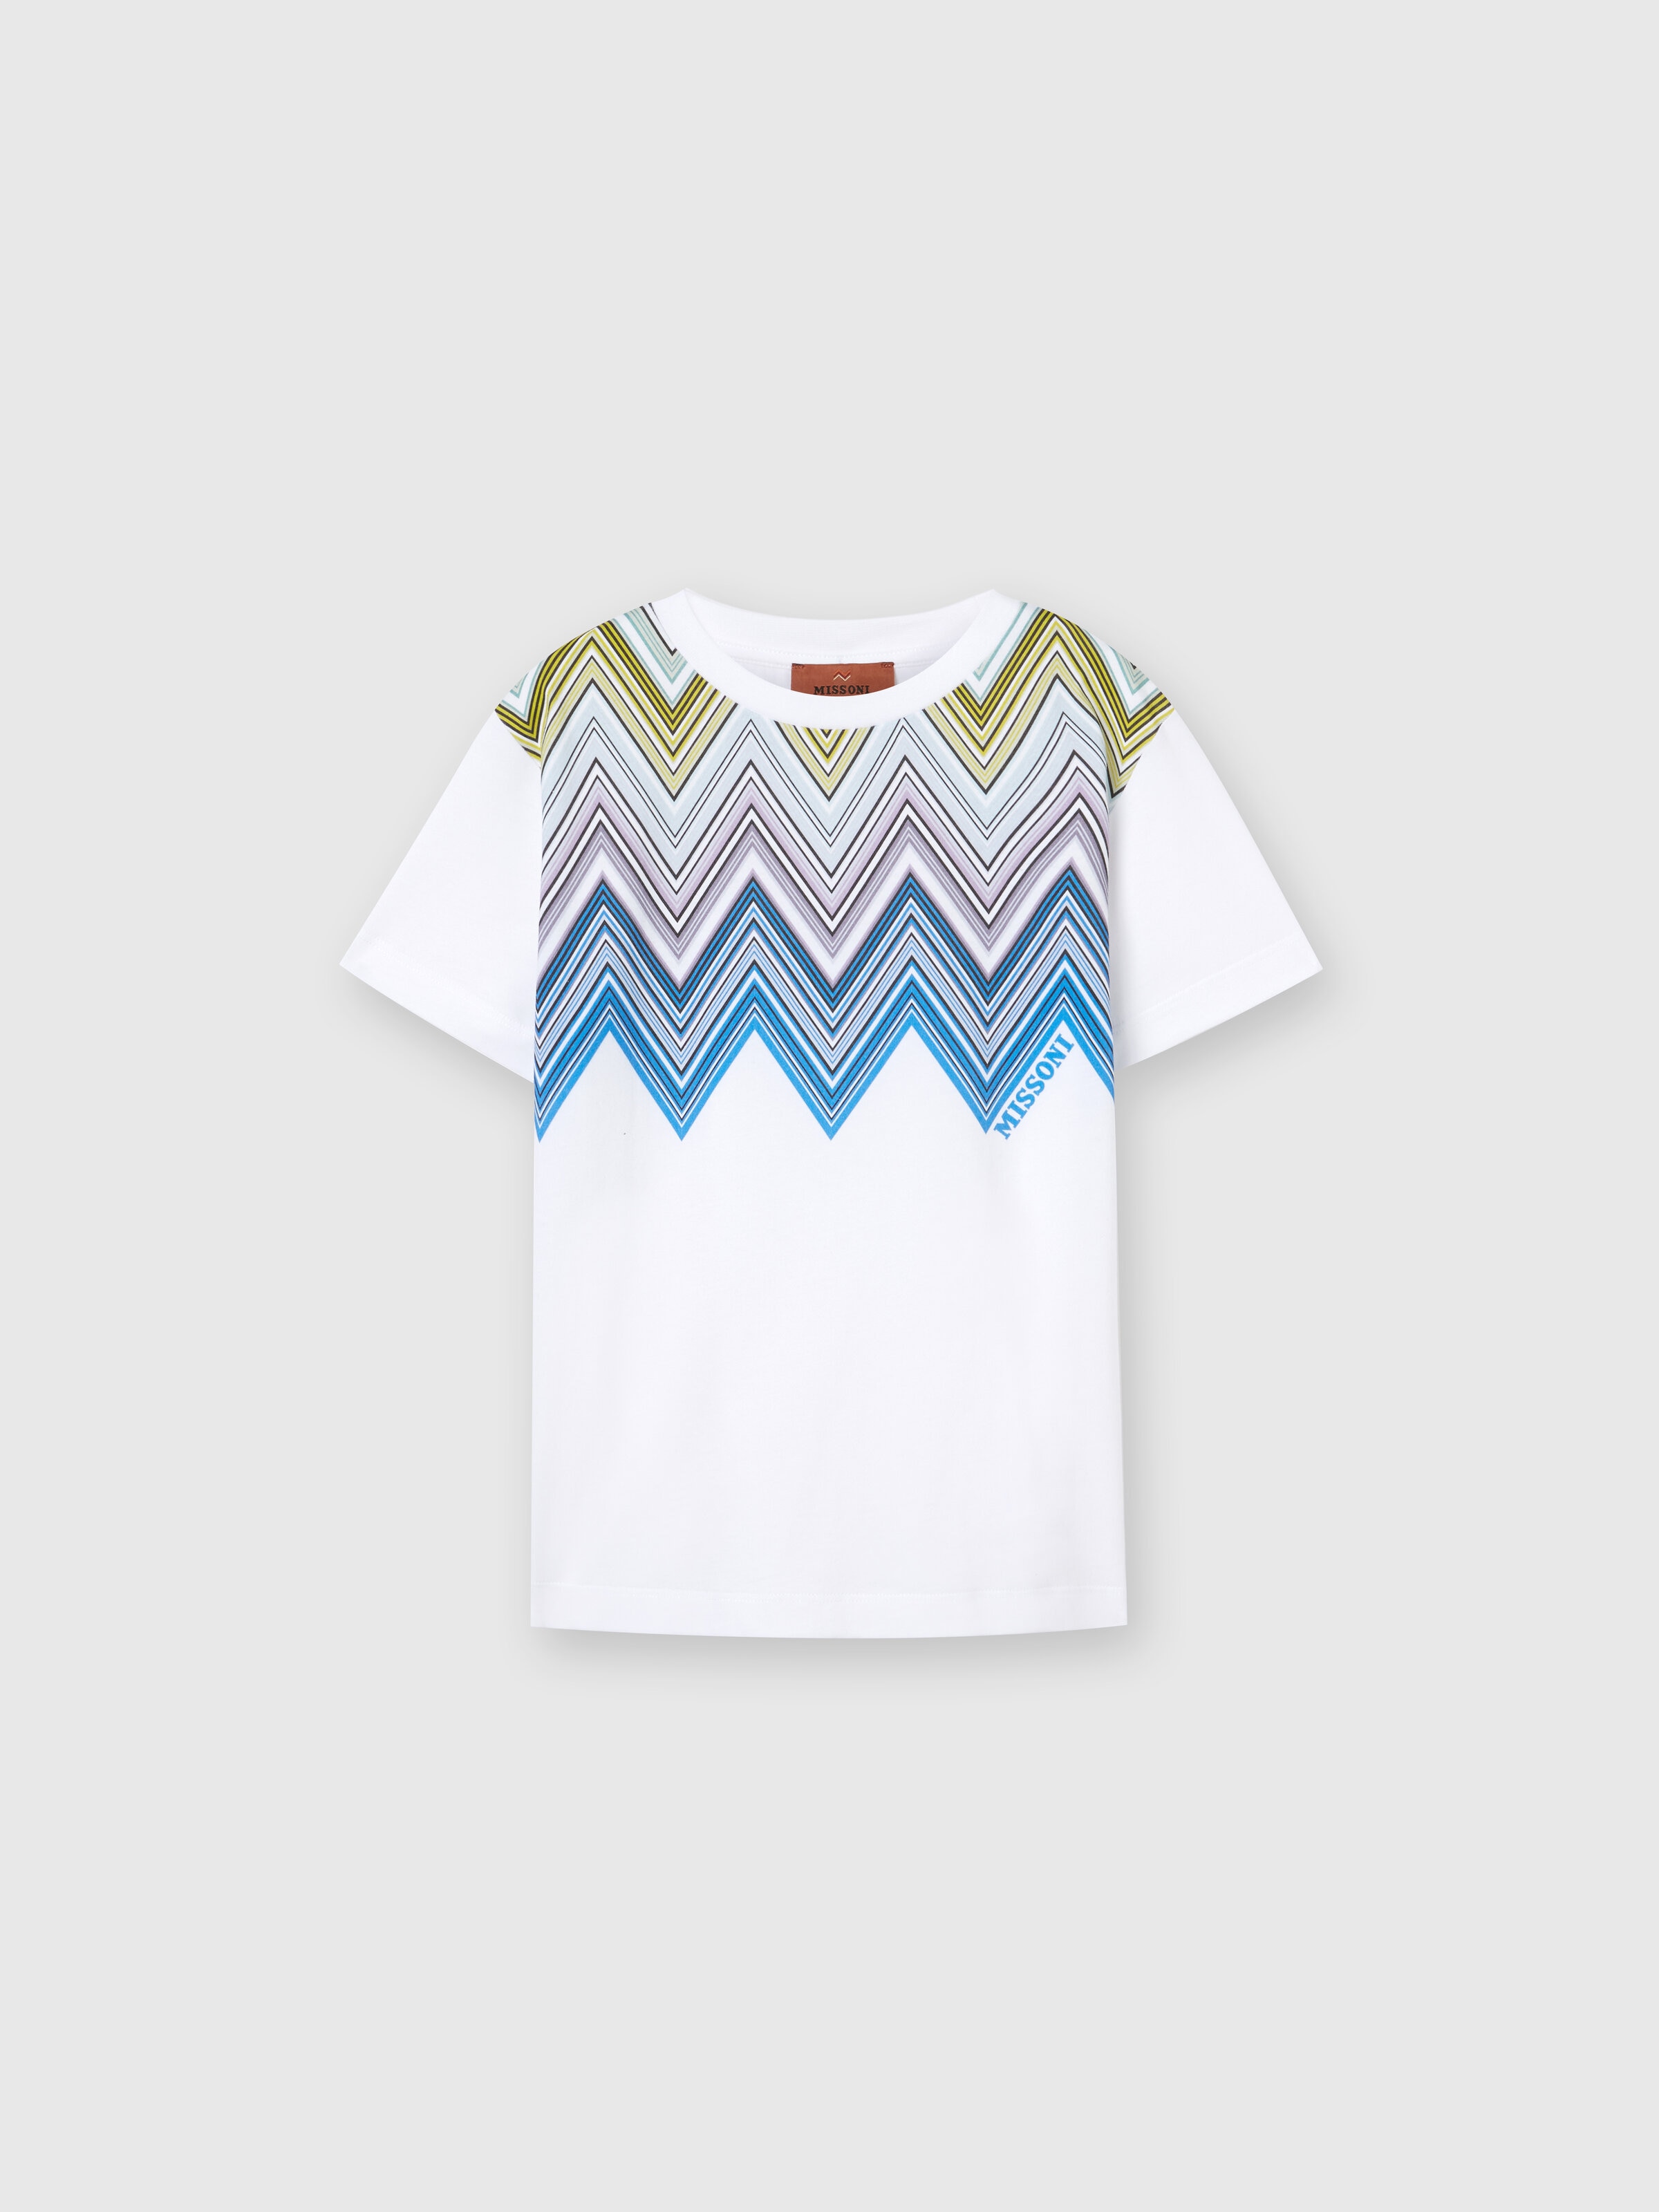 Short-sleeved T-shirt in cotton with chevron print, Multicoloured  - 0